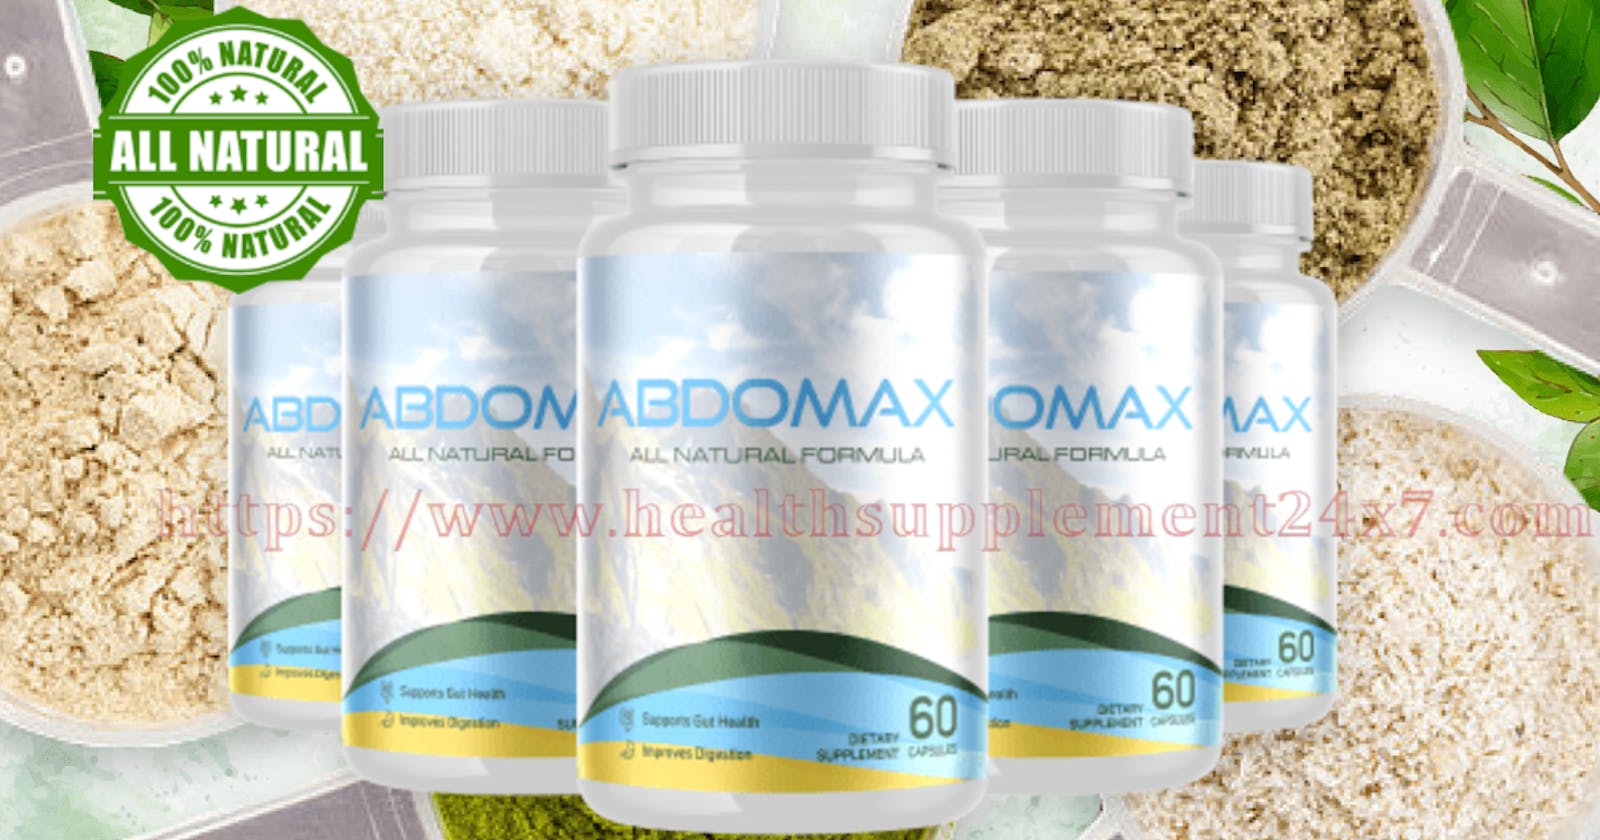 Abdomax [#1 Premium Dietary Capsules] Perfect Solution To Improves Gut Health Digestion | Immune System(Spam Or Legit)